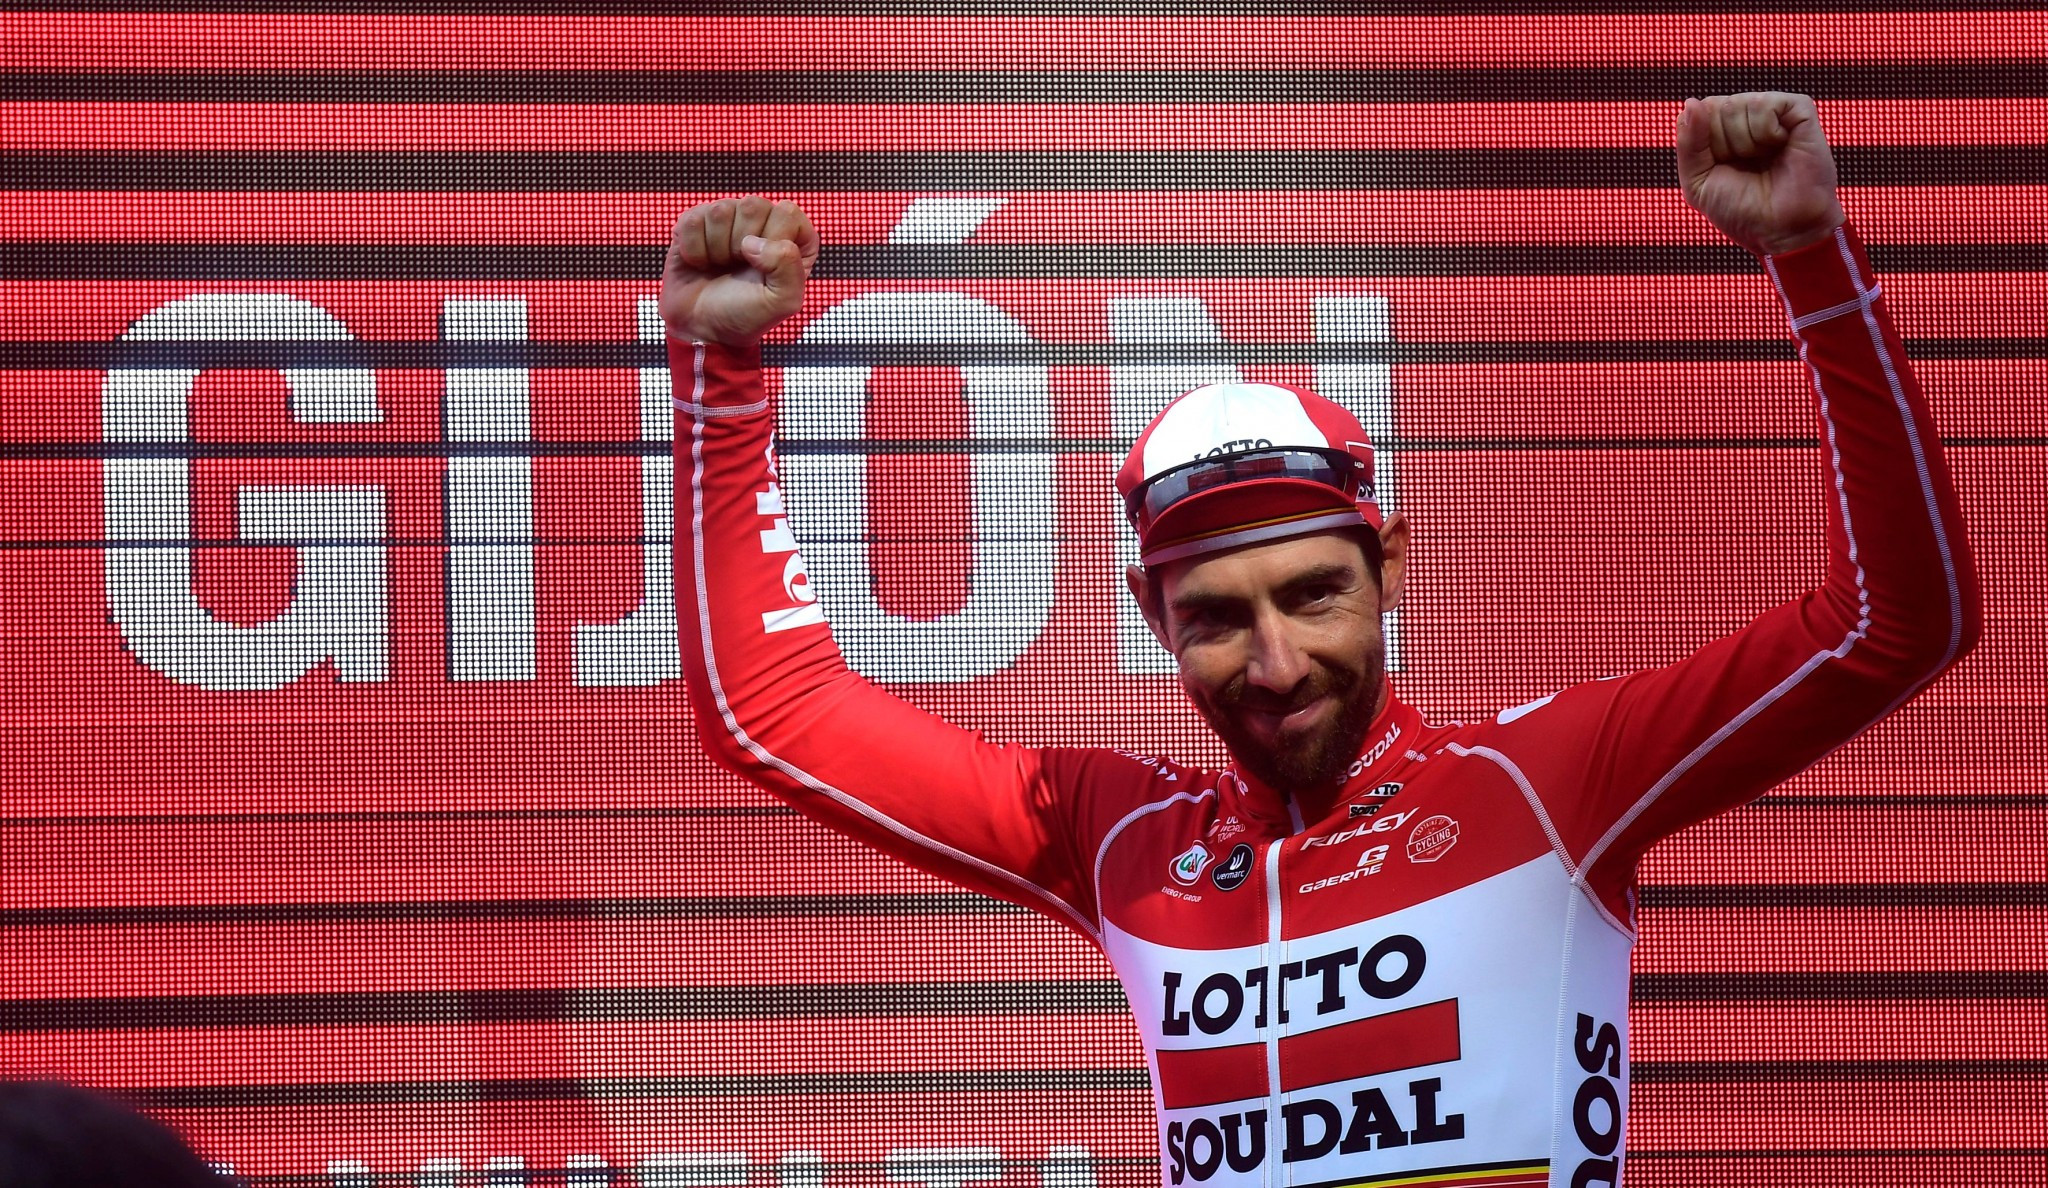 De Gendt claims Vuelta stage 19 win as leader Froome steadies before decisive test